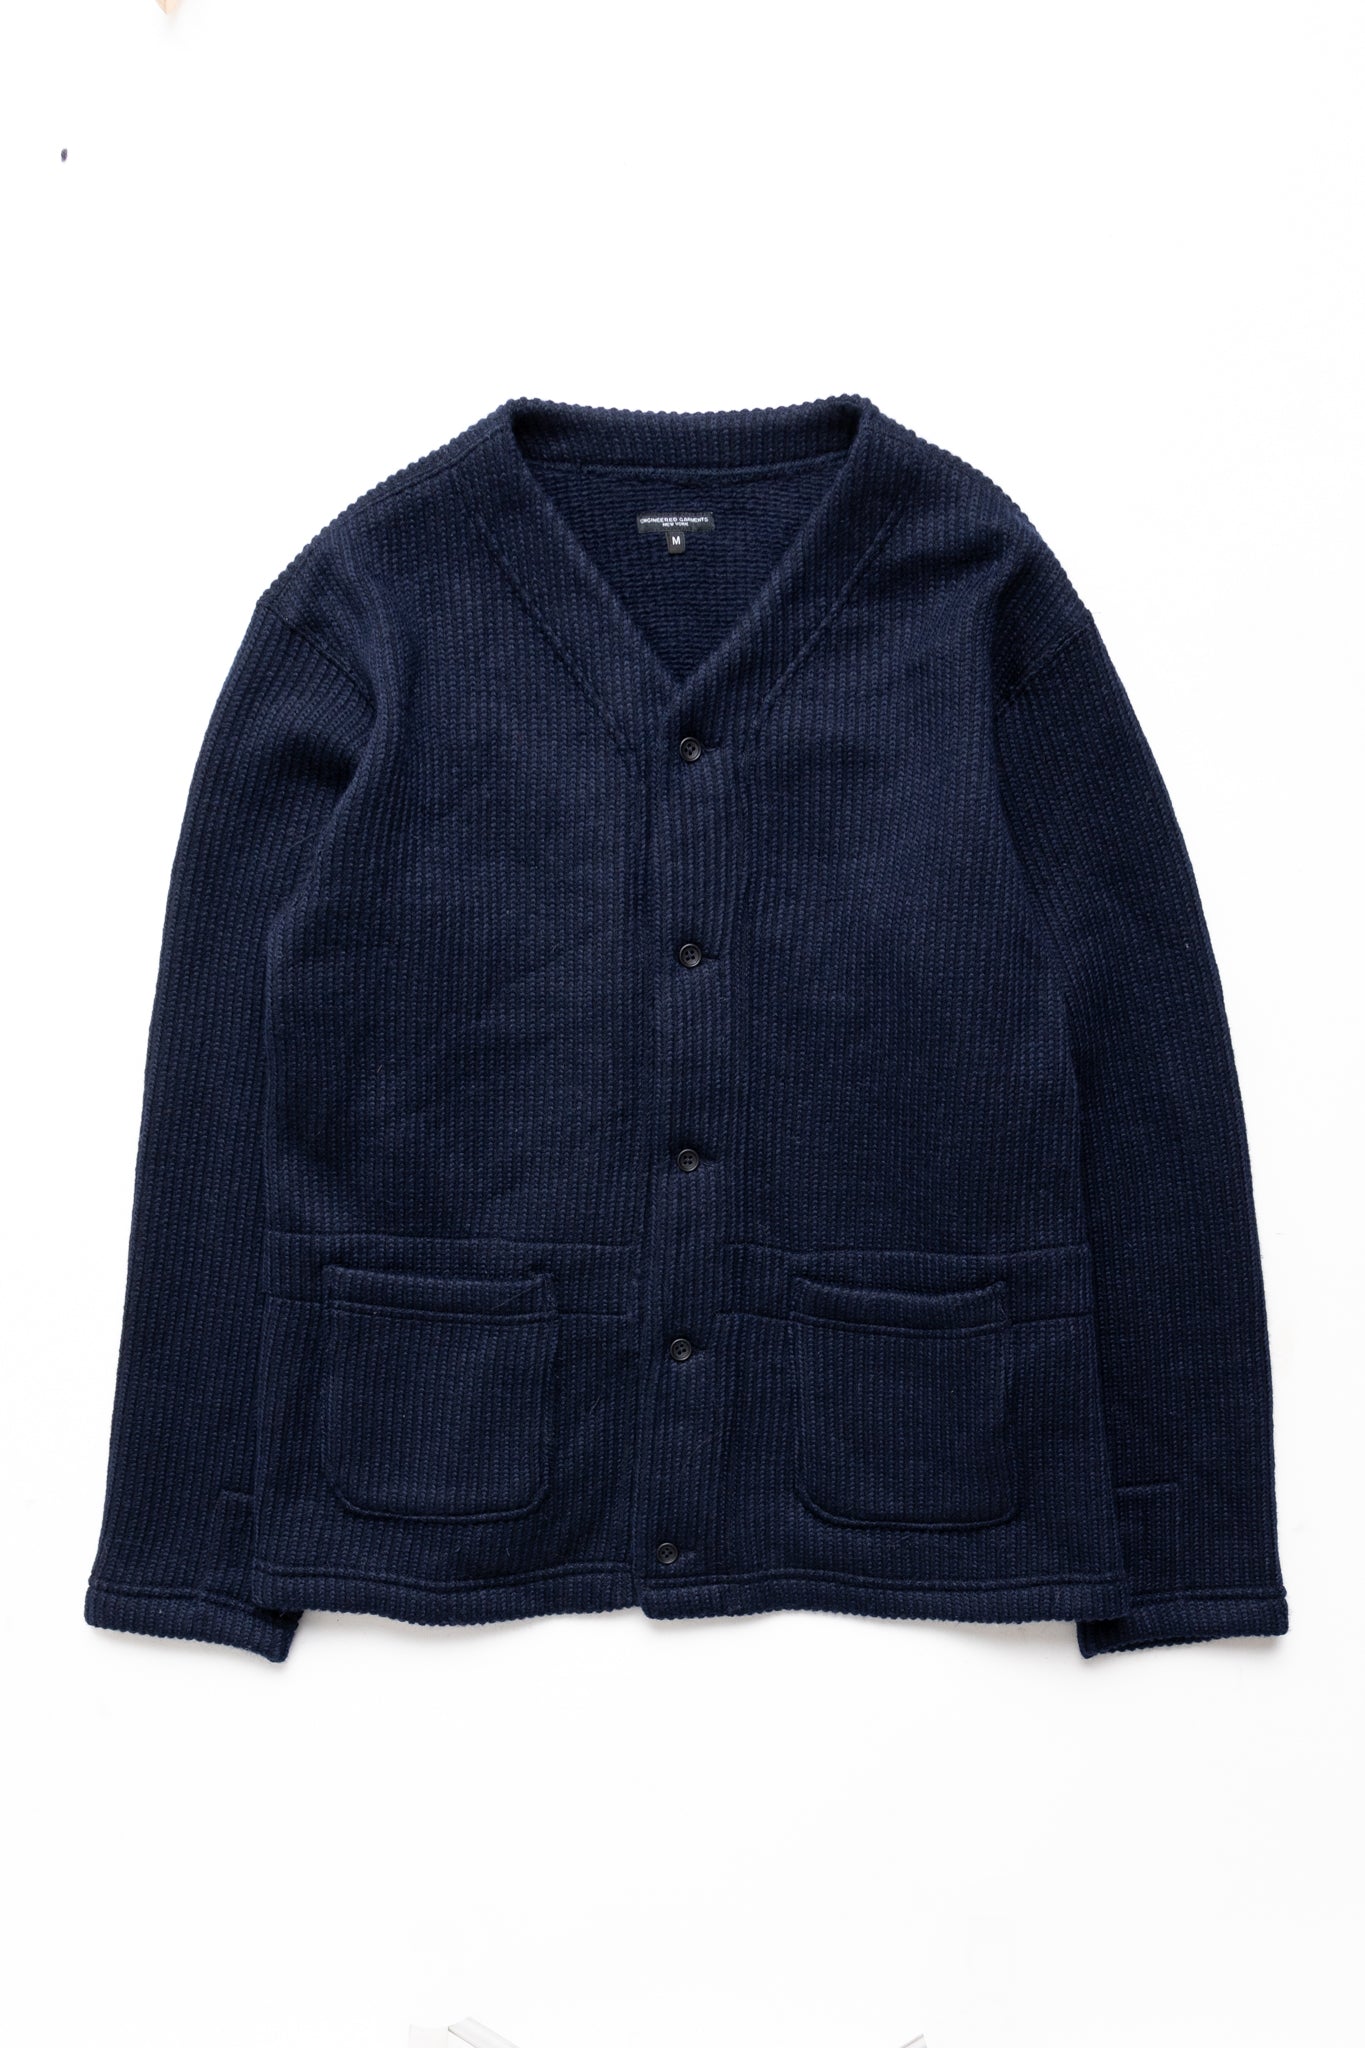 Knit Cardigan Wool Poly Sweater Knit - Navy